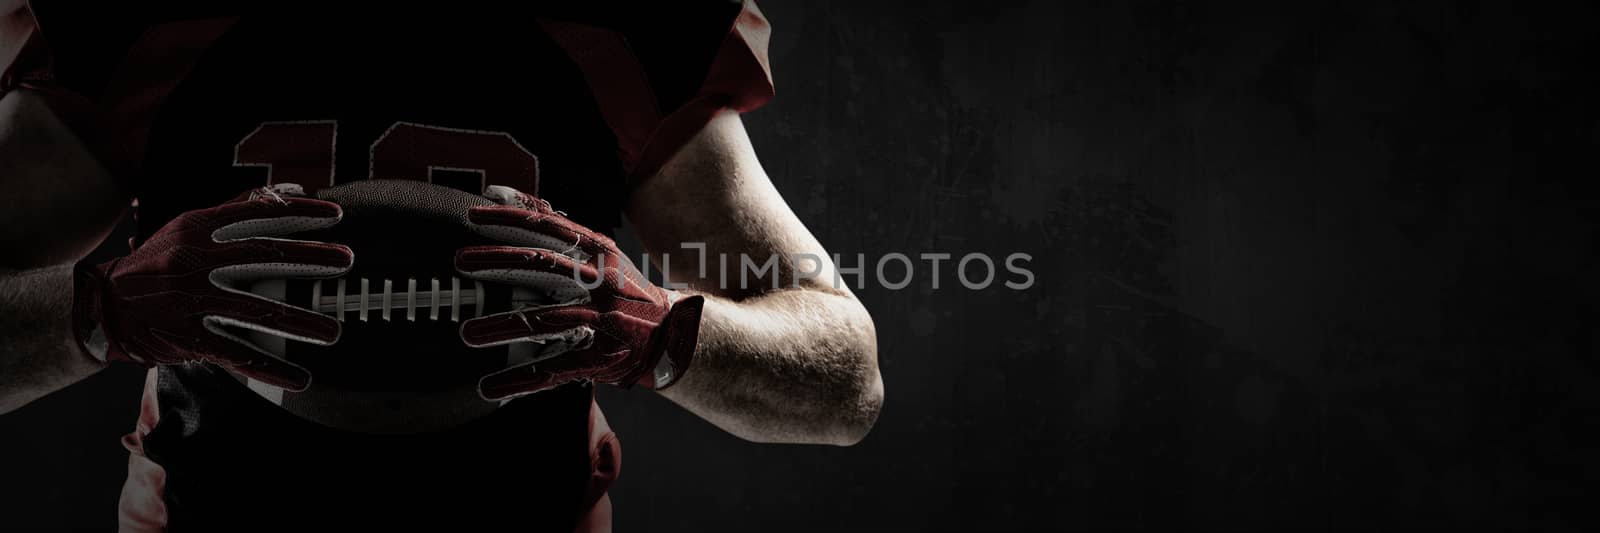 American football player holding rugby ball against full frame shot of grunged concrete wall